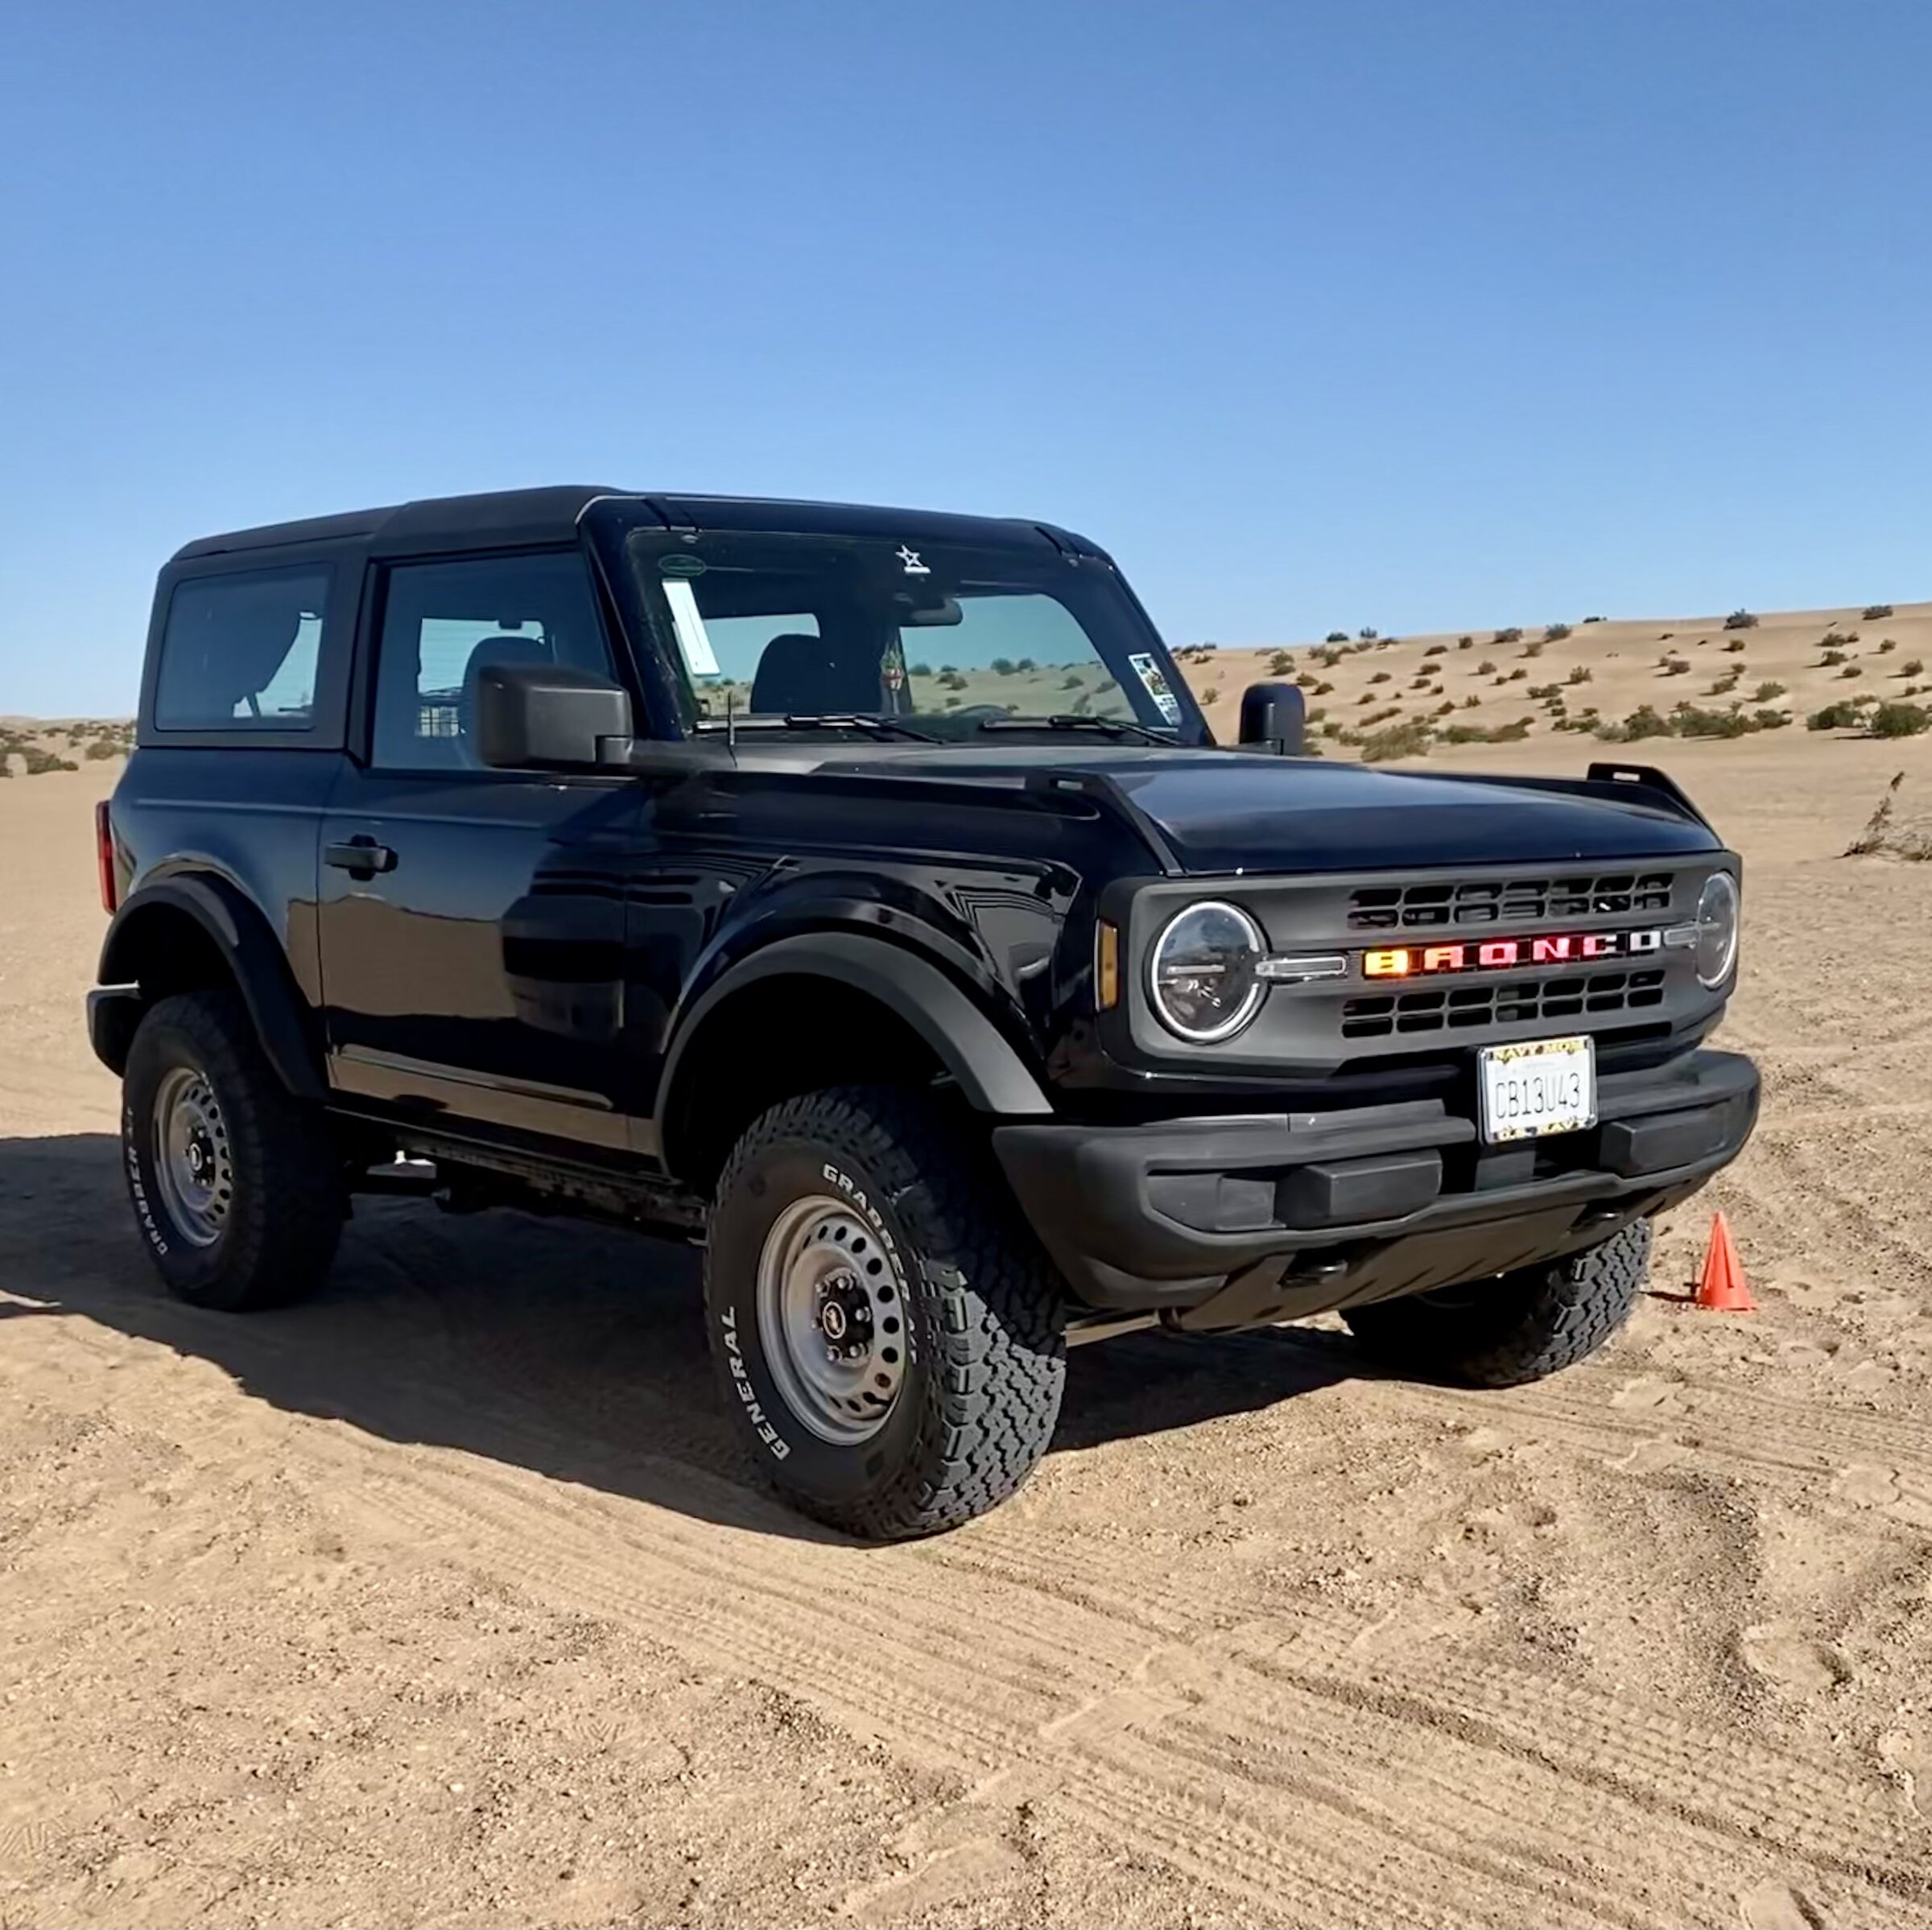 Ford Bronco Base Base Owners - I have some questions 😬 AD35C48C-D8A7-44D1-B23D-B7DA79EA41D5